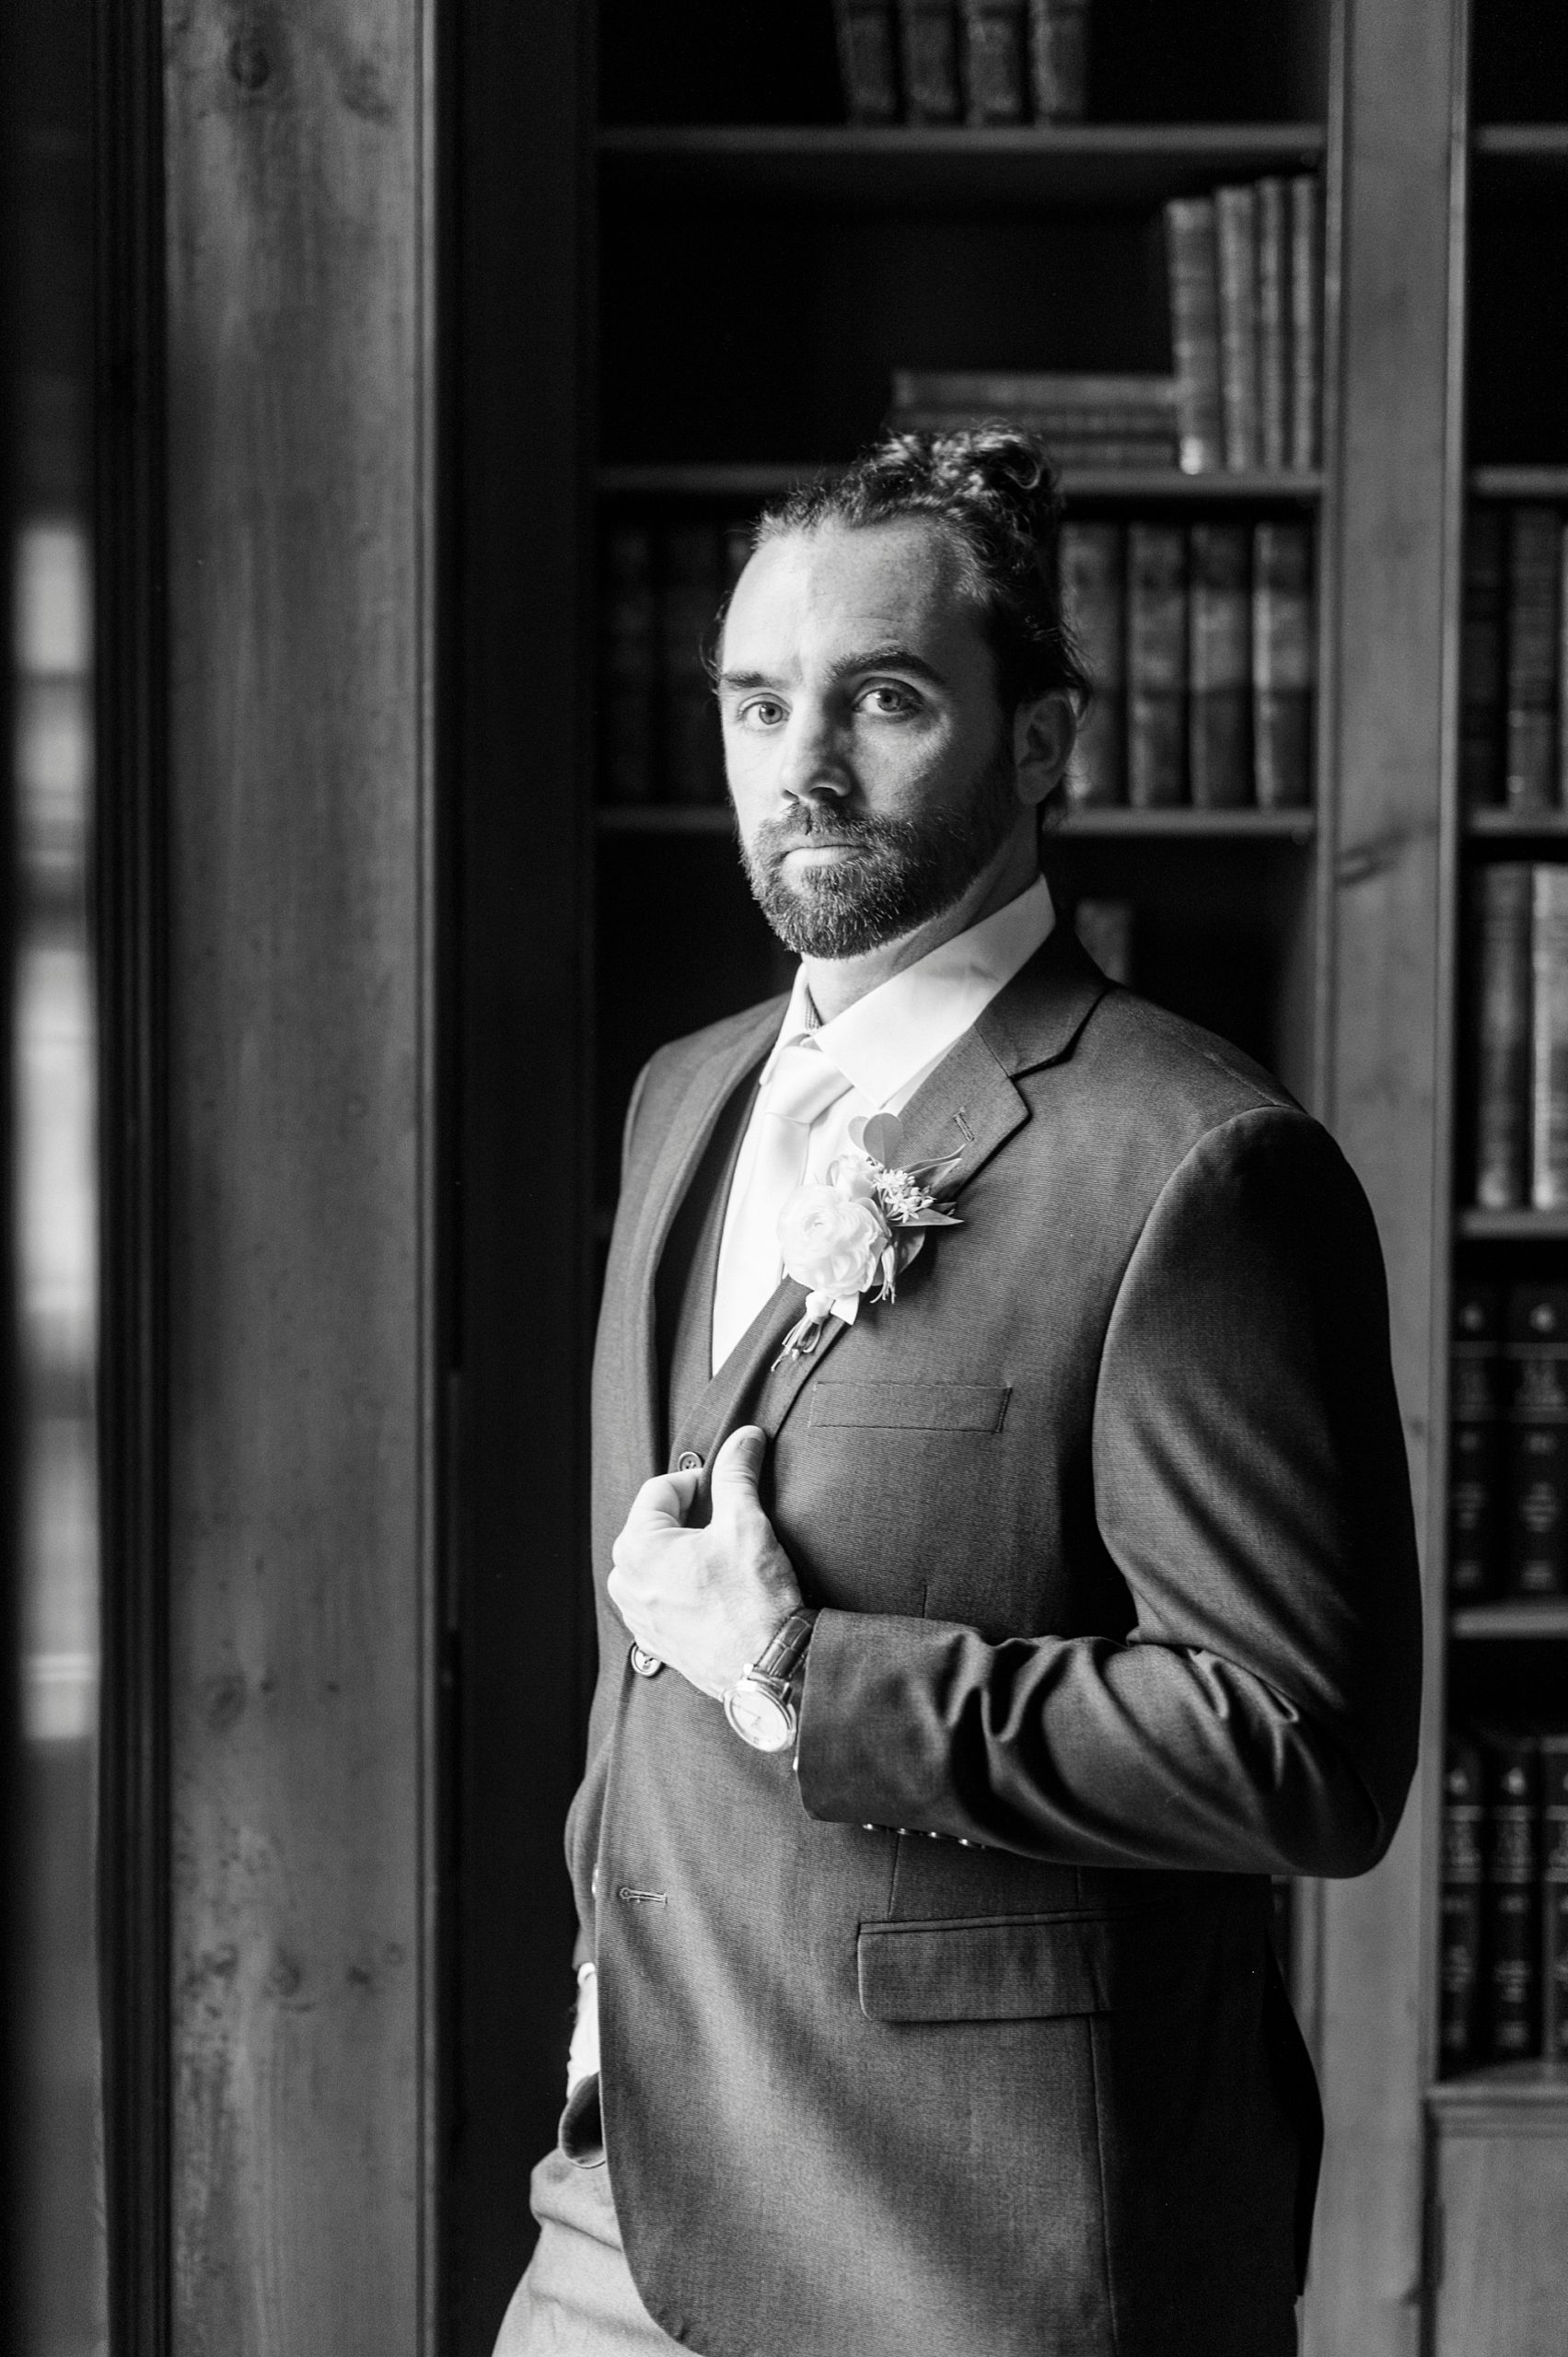 black and white portrait of groom by window in library at Boxwood Estate